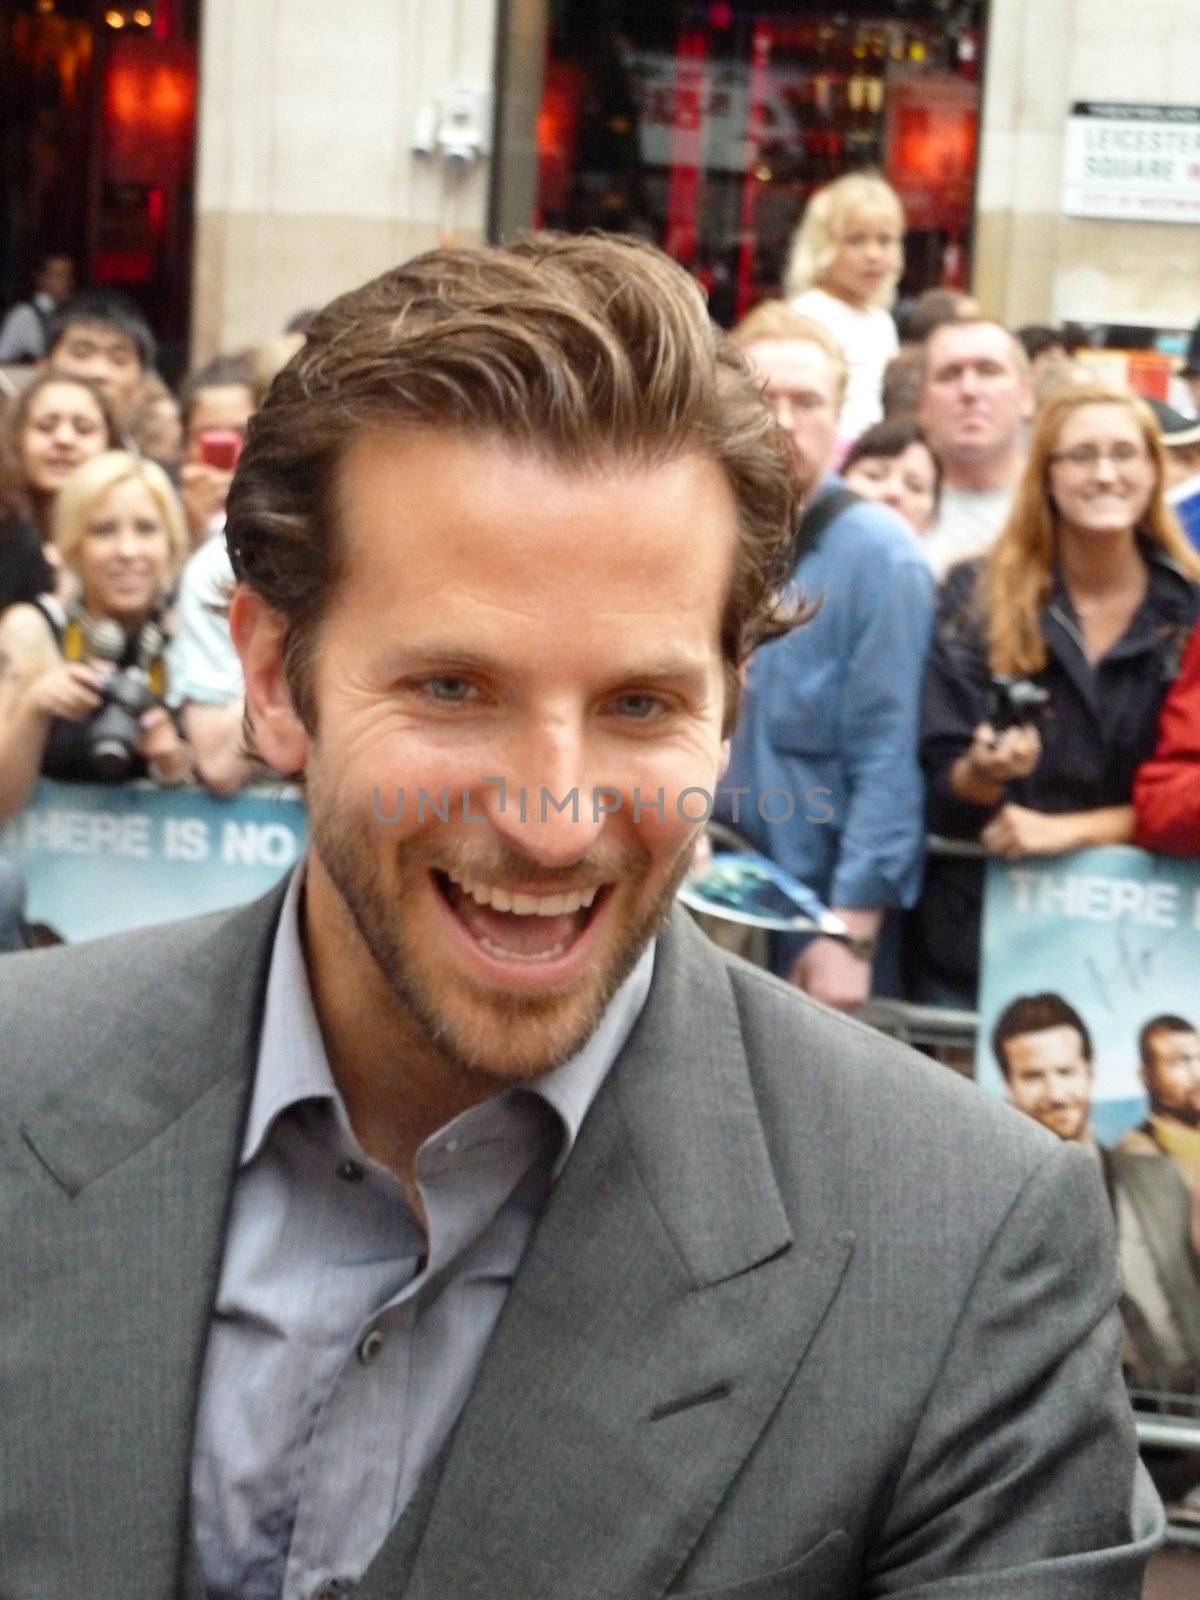 LONDON - July 27: Bradley Cooper at A Team Premiere July 27th, 2010 in Leicester Square London, England.